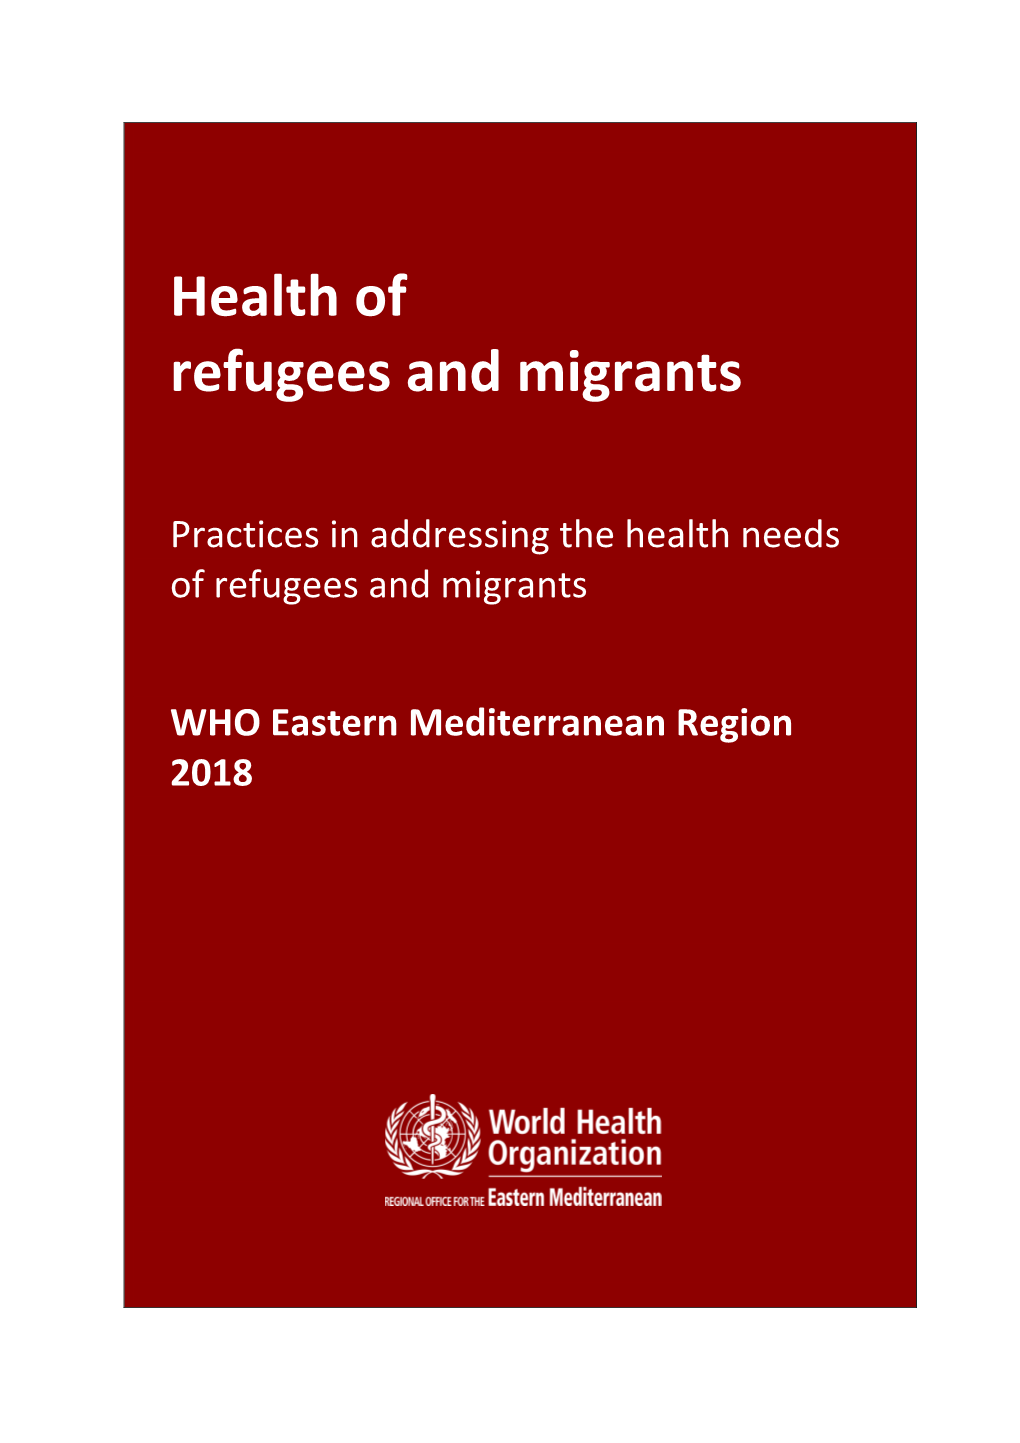 Health of Refugees and Migrants